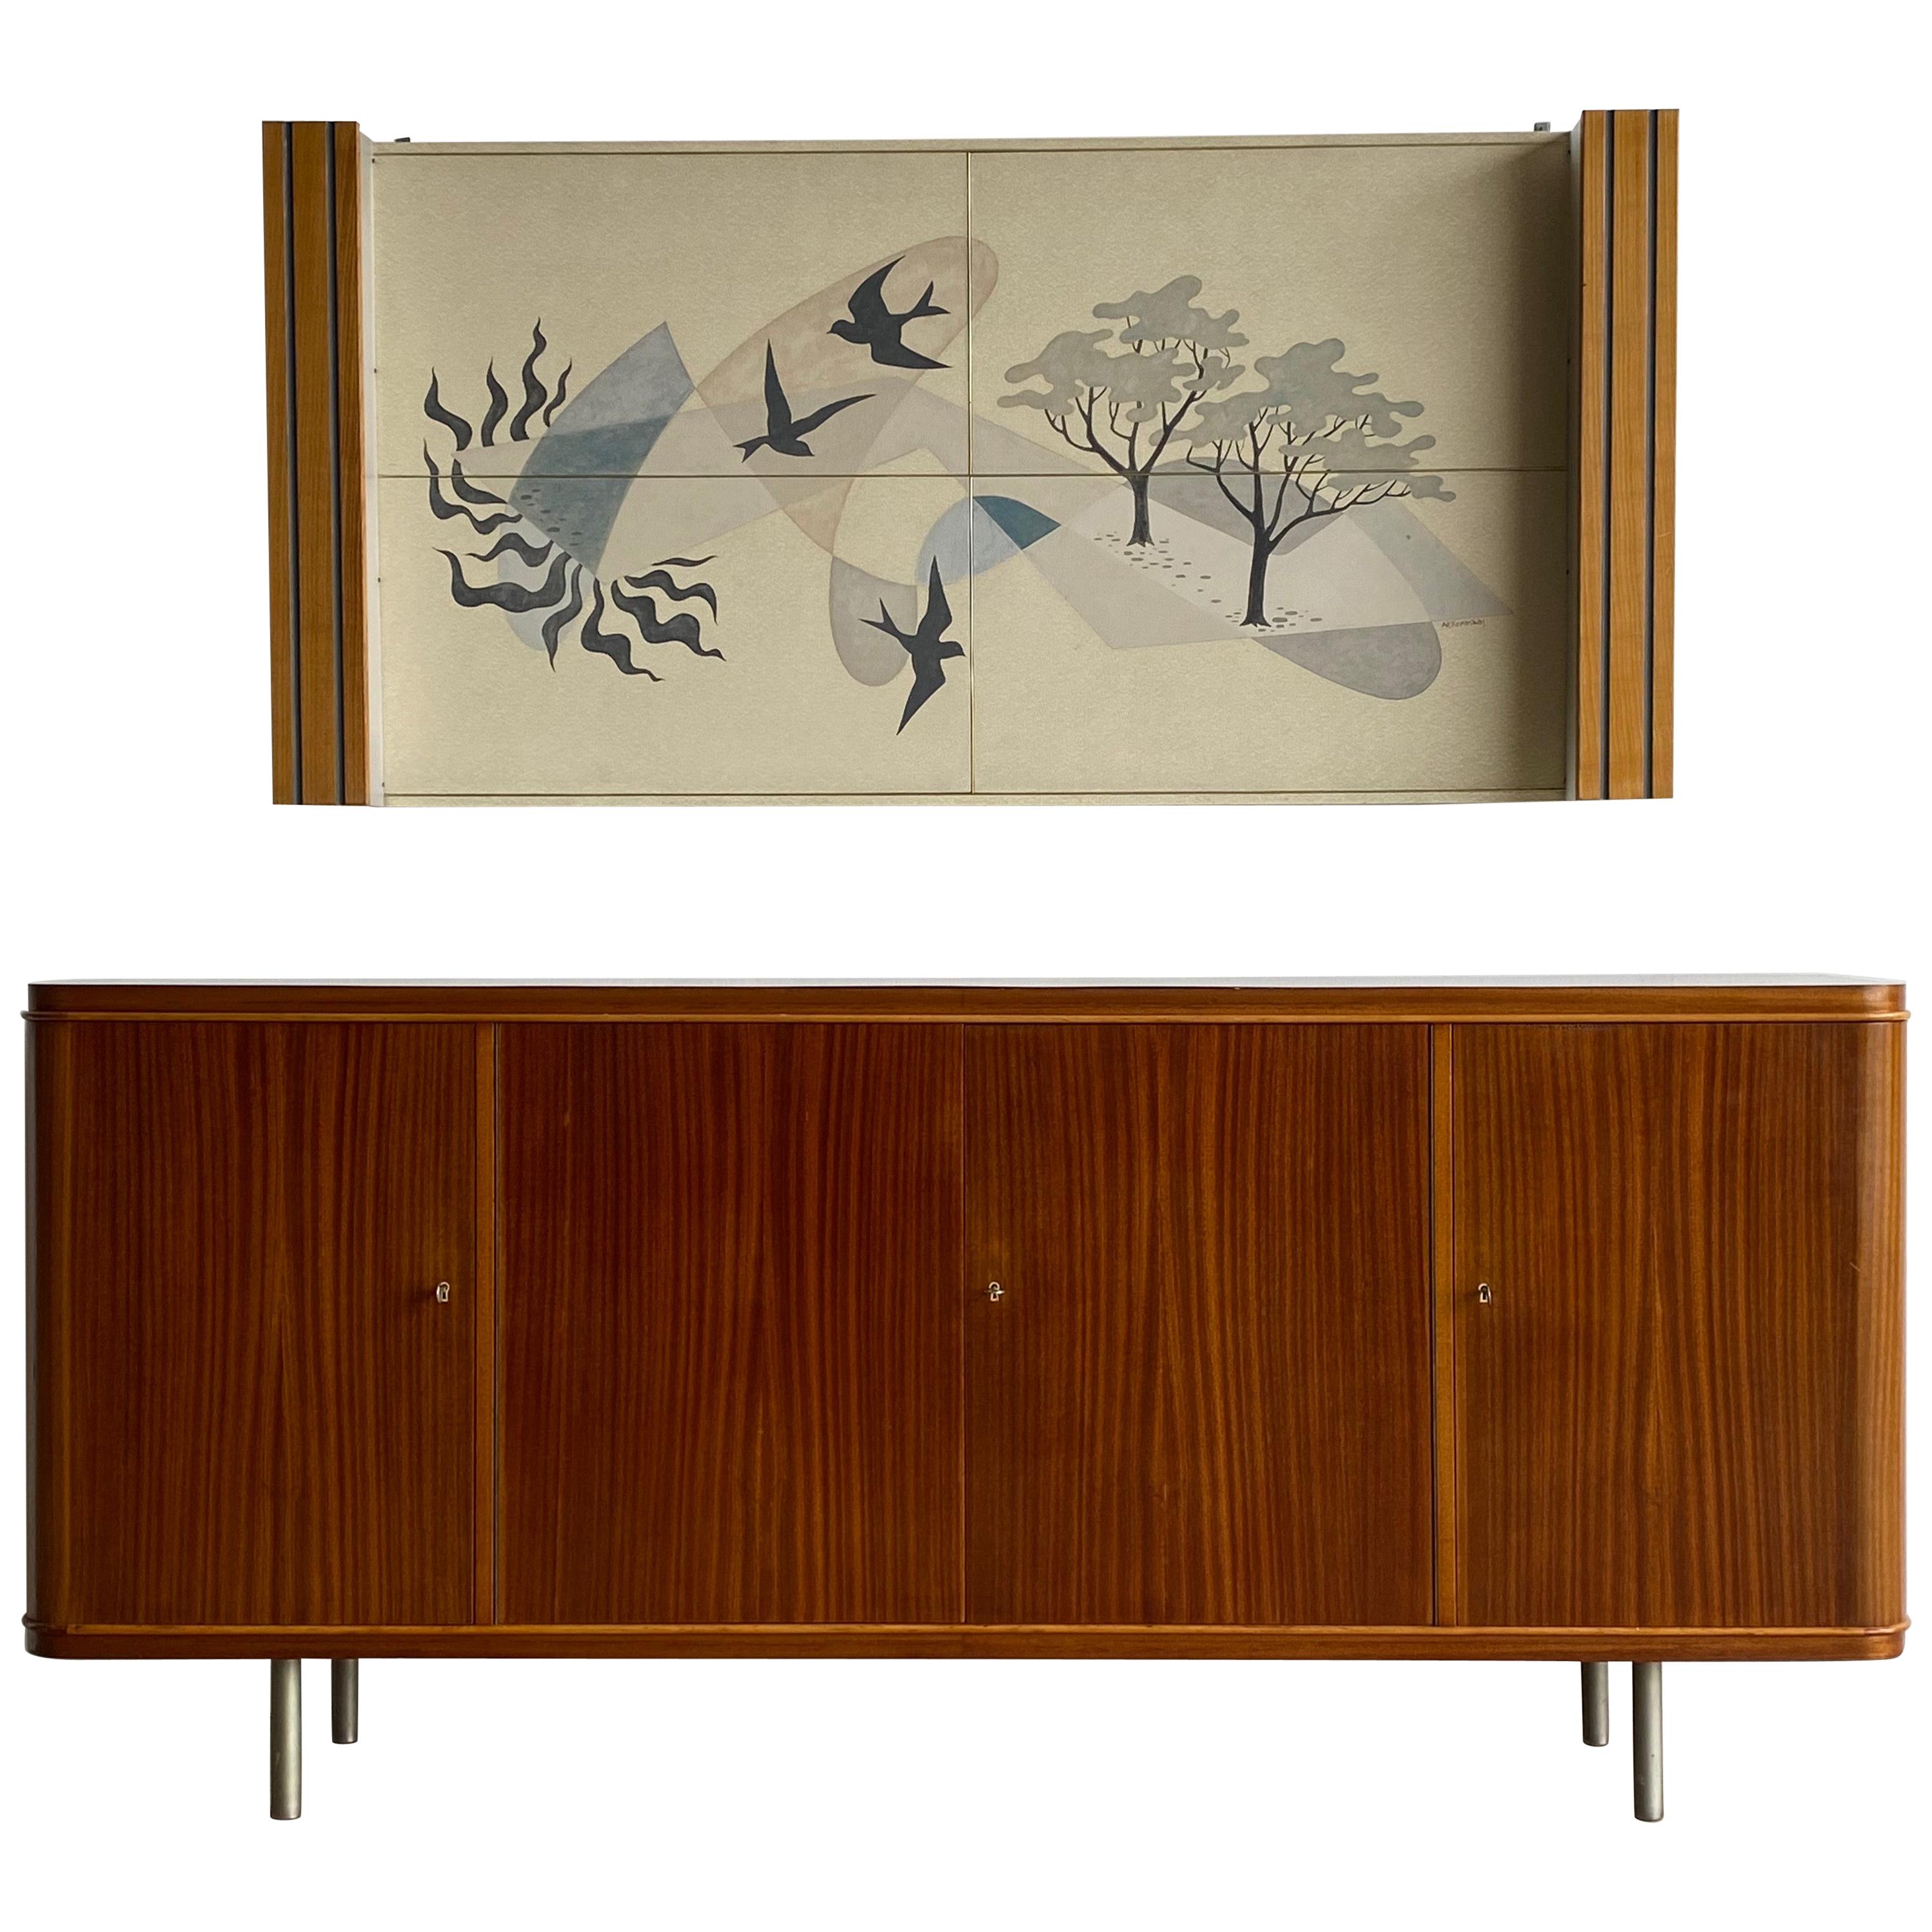 Sideboard and Matching Decorative Art Piece from the Cruise Liner "SS Rotterdam" For Sale